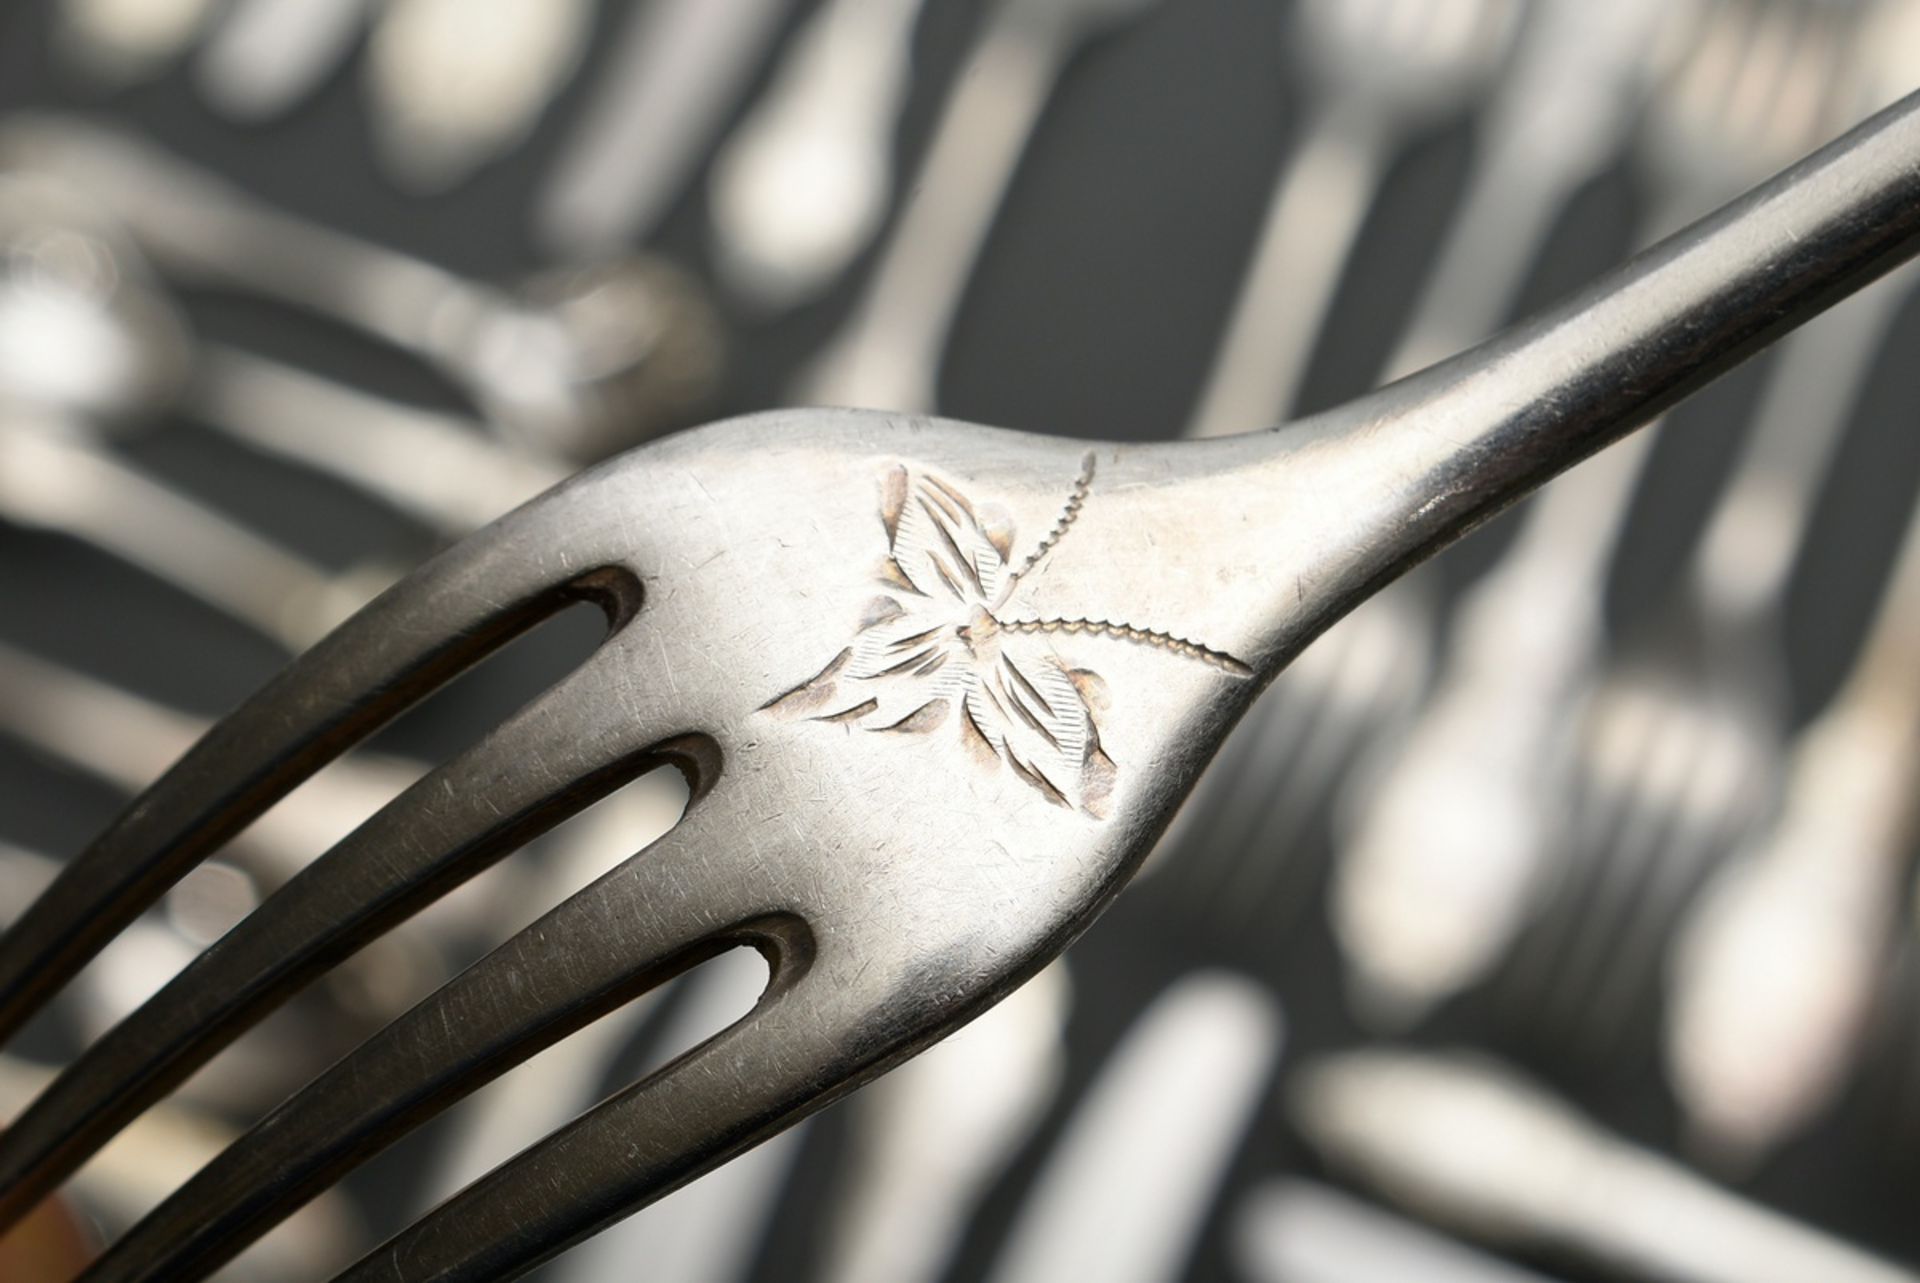 118 pieces Robbe & Berking cutlery ‘Ostfriesenmuster’, silver 800, 2182g (without knives), consisti - Image 7 of 12